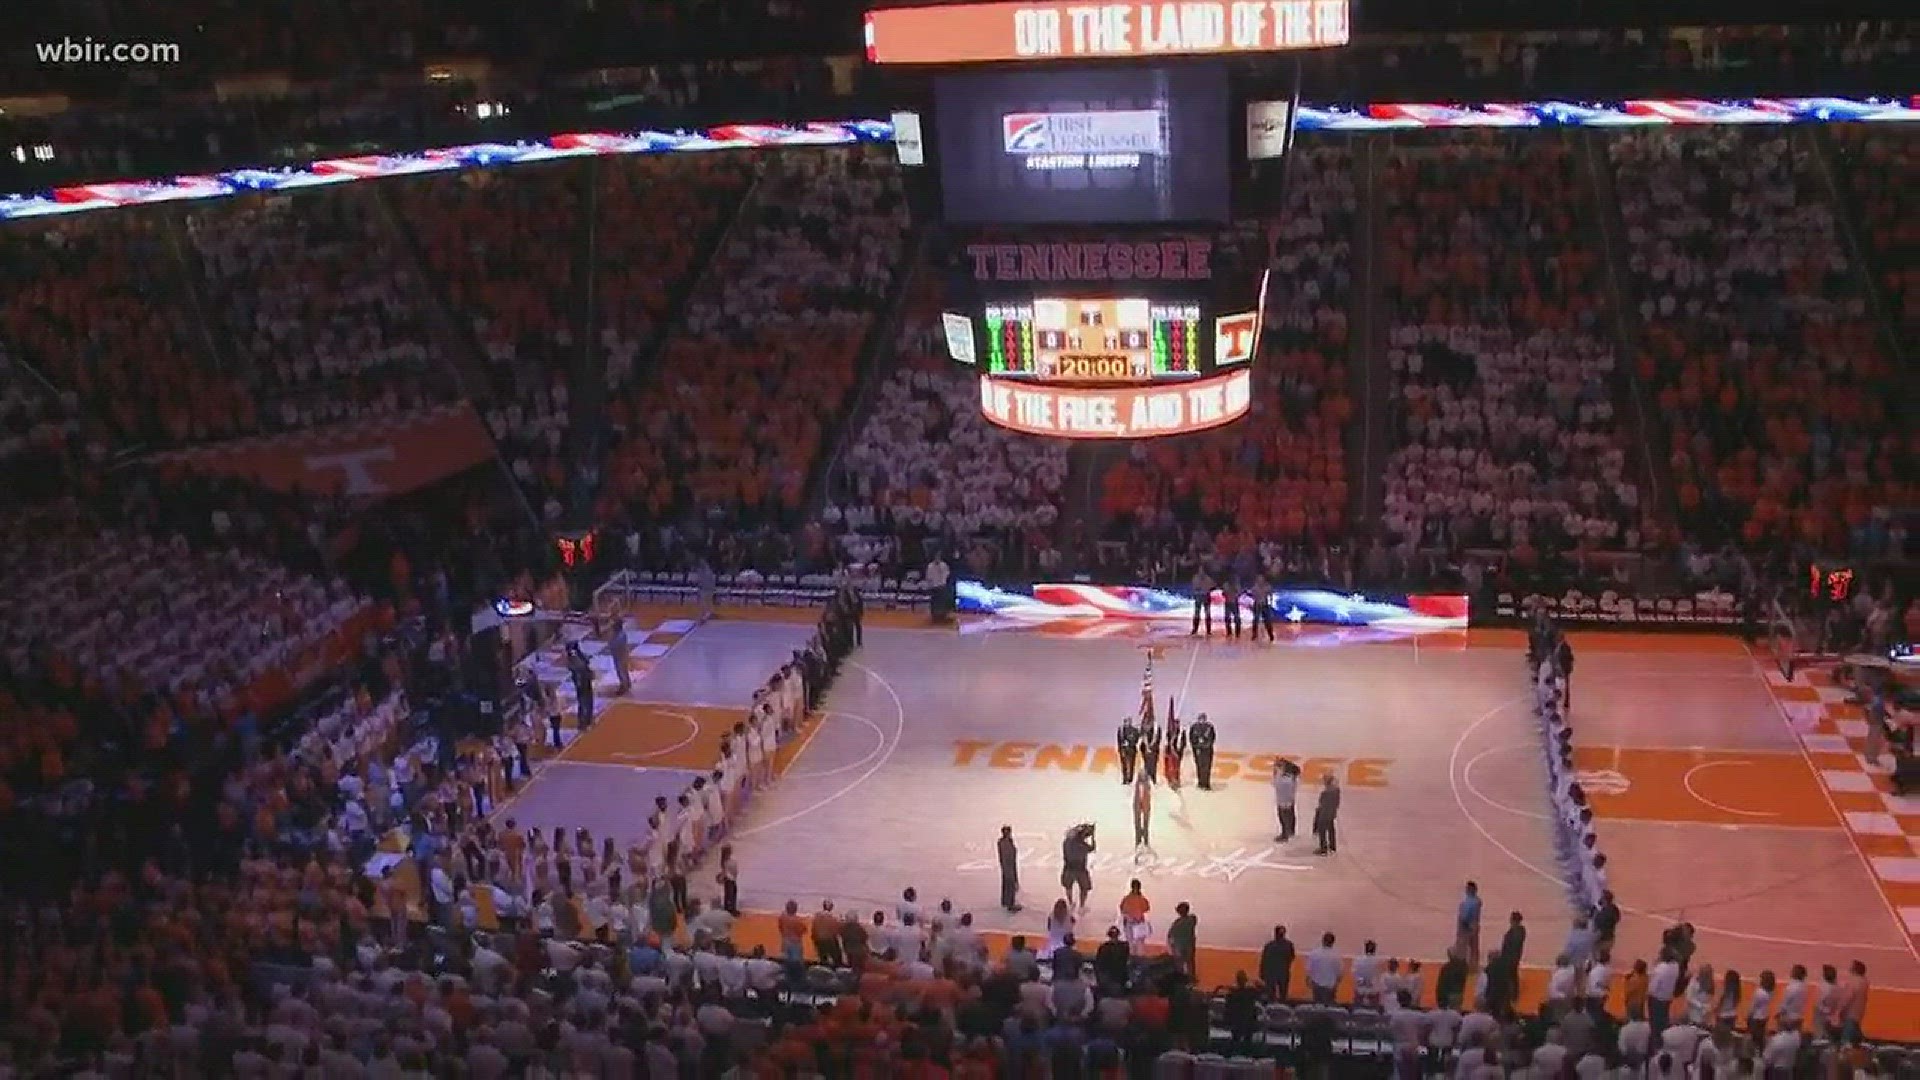 A sellout crowd of 21,678 "checkered" Thompson-Boling Arena for Sunday's game.